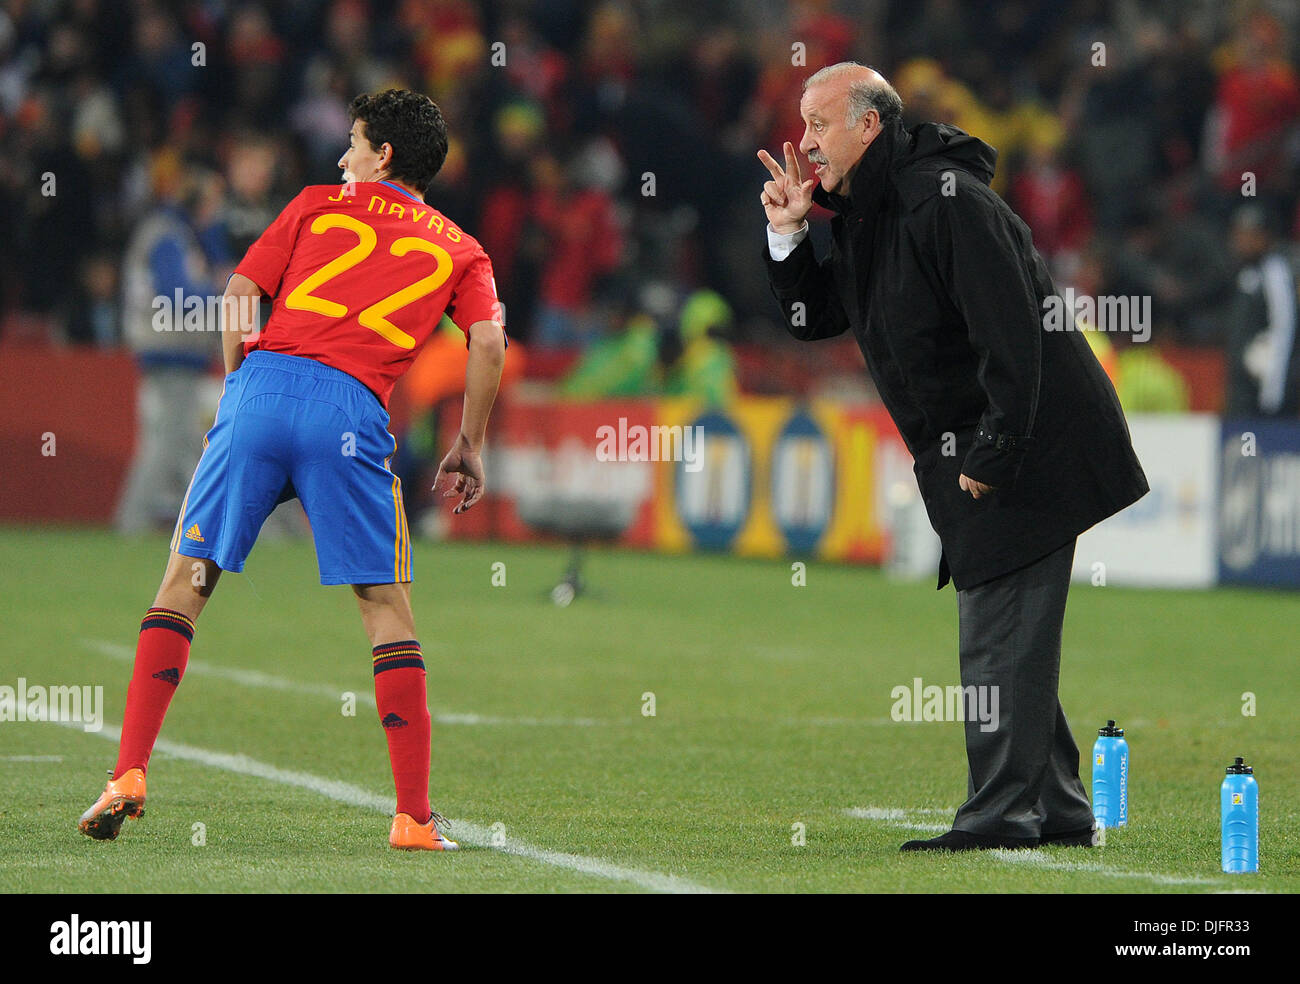 June 21, 2010 - Johannesburg, South Africa - Vicente Del Bosque, coach of Spain gestures with Jesus Navas during the 2010 FIFA World Cup soccer match between Spain and Honduras at Ellis Park Stadium on June 21, 2010 in Johannesburg, South Africa. (Credit Image: © Luca Ghidoni/ZUMApress.com) Stock Photo